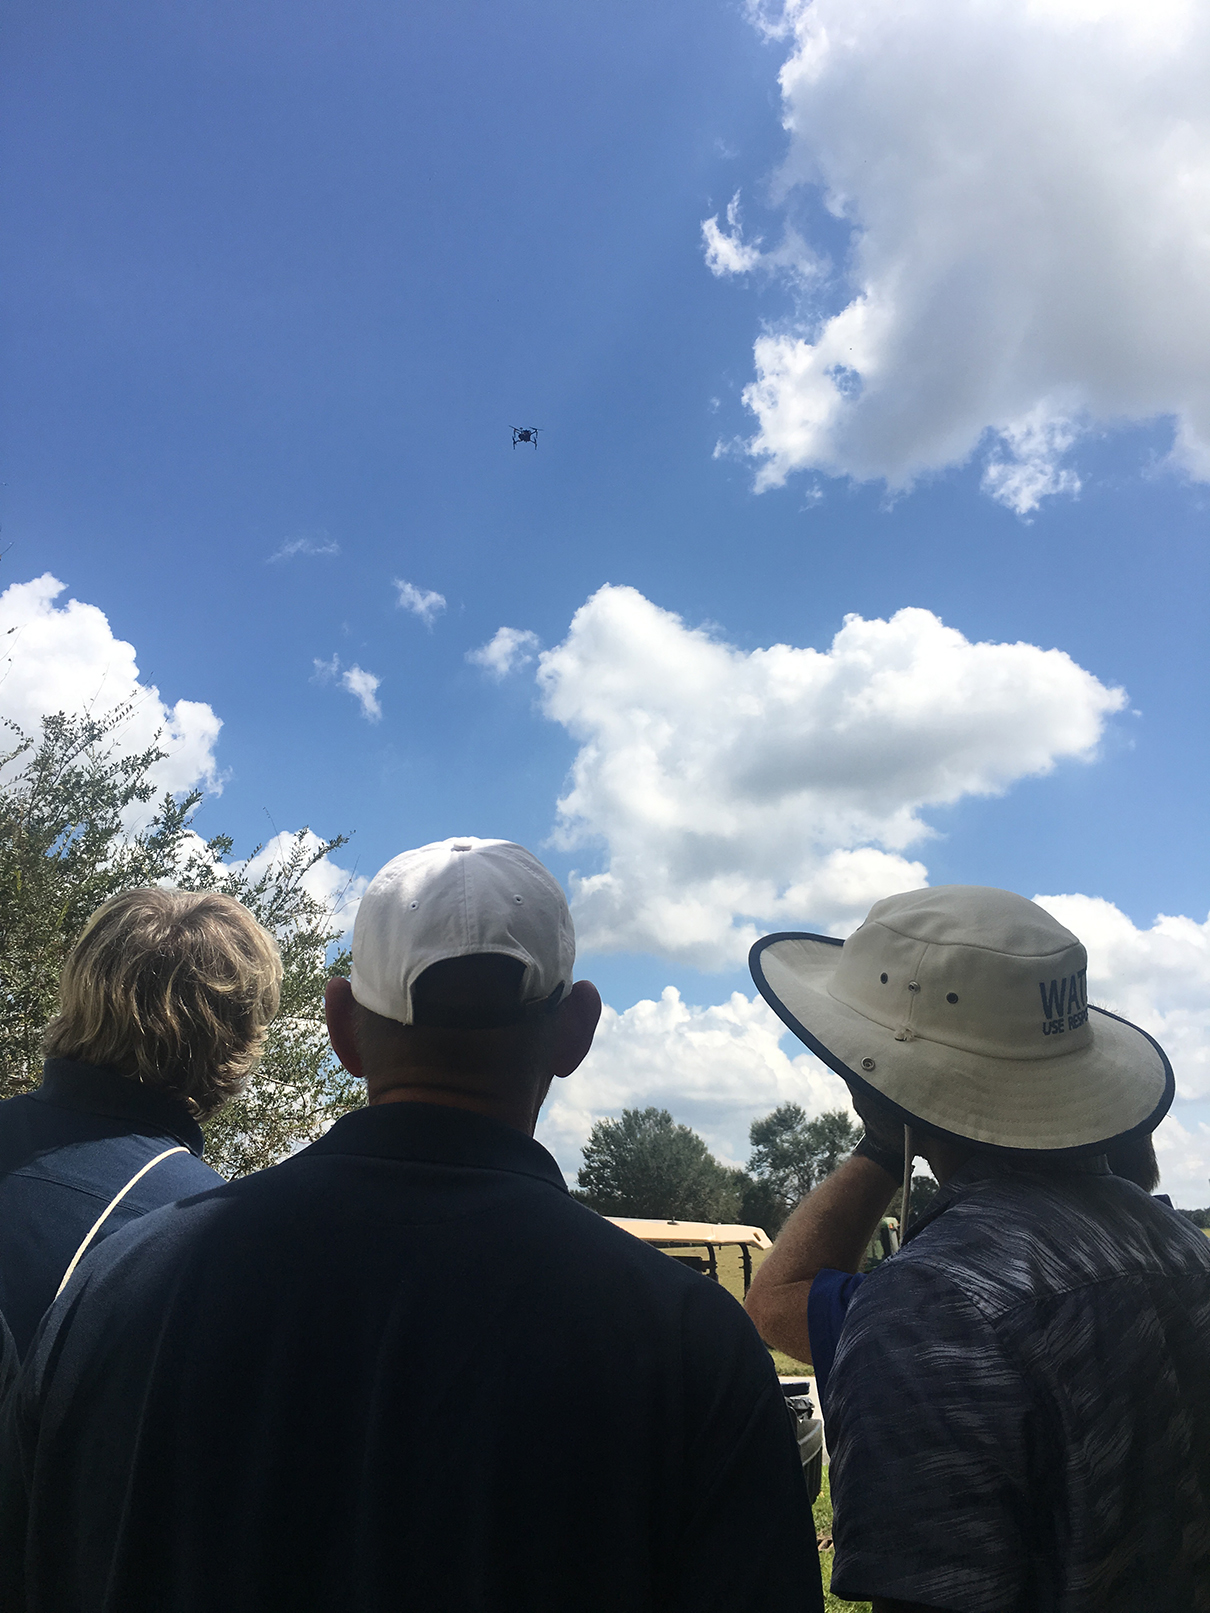 Photo of people looking up, watching a drone flying in a blue sky.